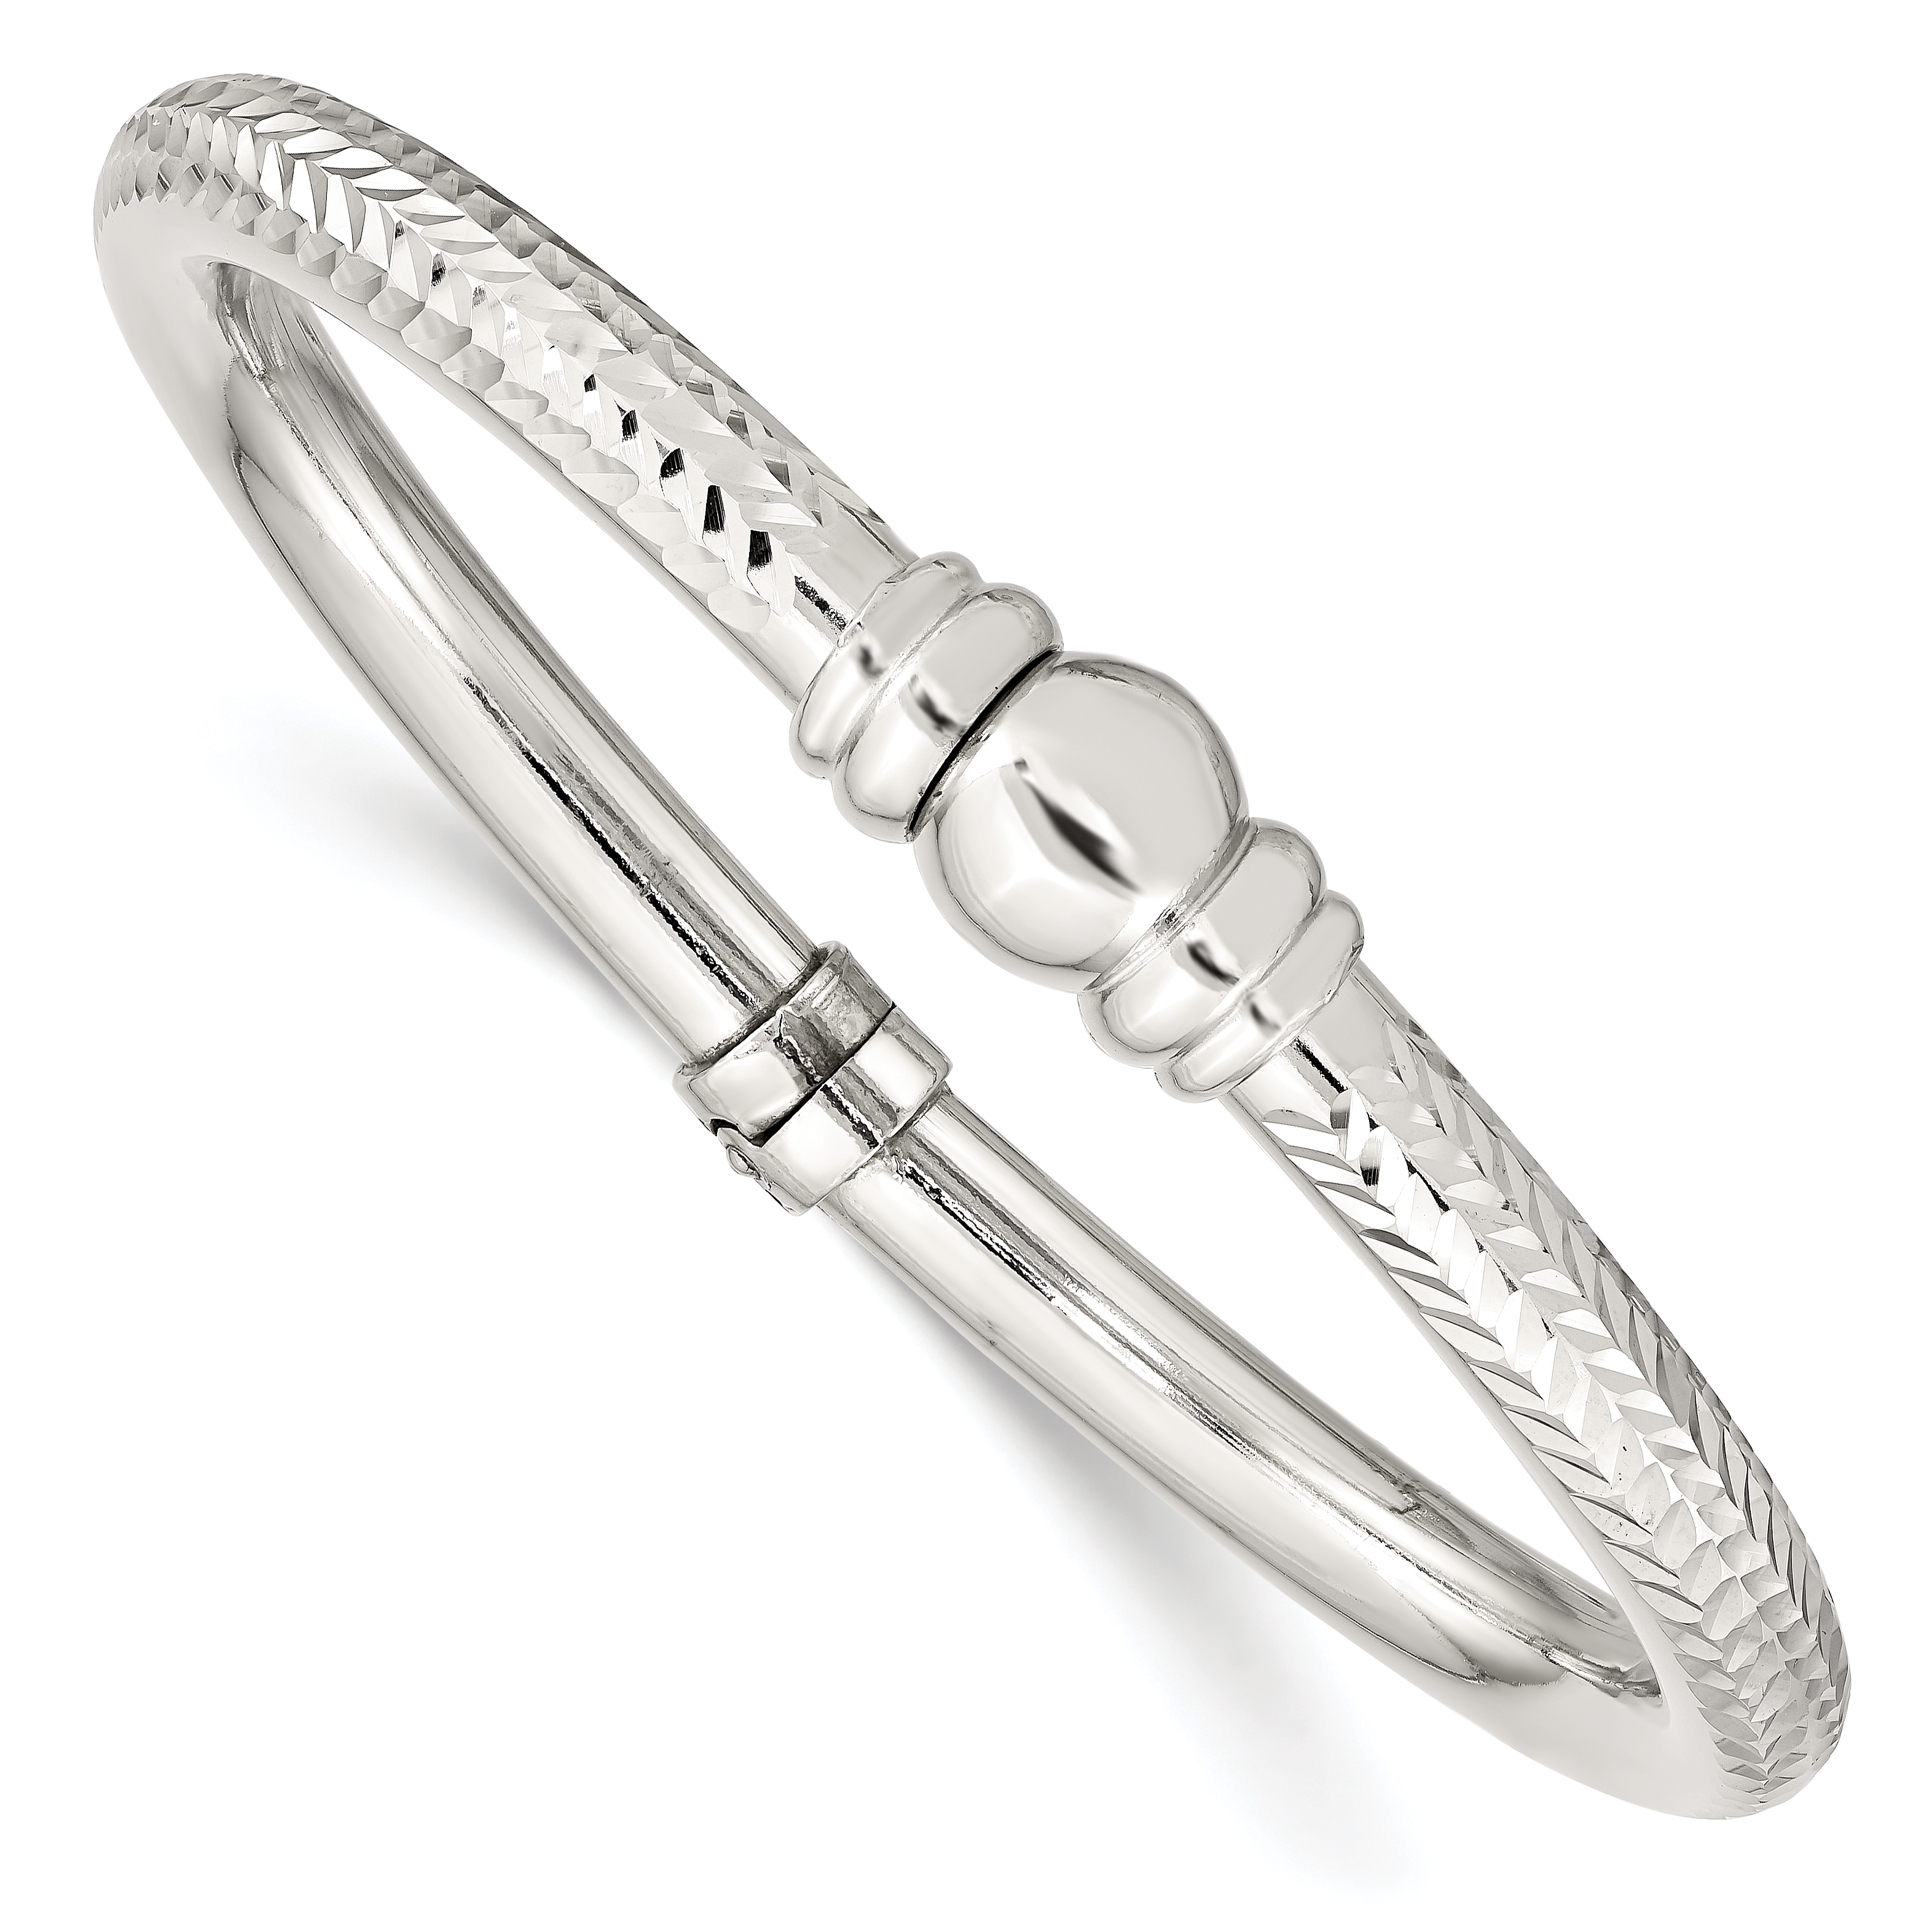 Sterling Silver Fancy Italian Made Rhodium-Plated Polished Twisted Hinged Bangle Bracelet 